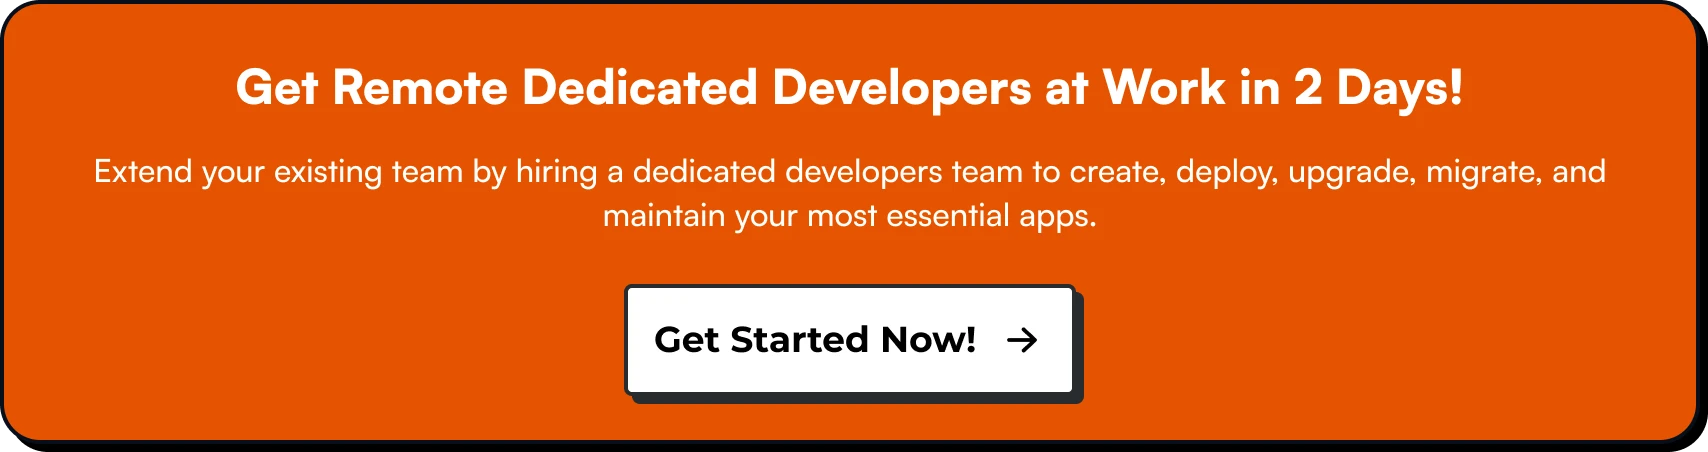 Get Remote Dedicated Developers at Work in 2 Days! Extend your existing team by hiring a dedicated developers team to create, deploy, upgrade, migrate, and maintain your most essential apps.